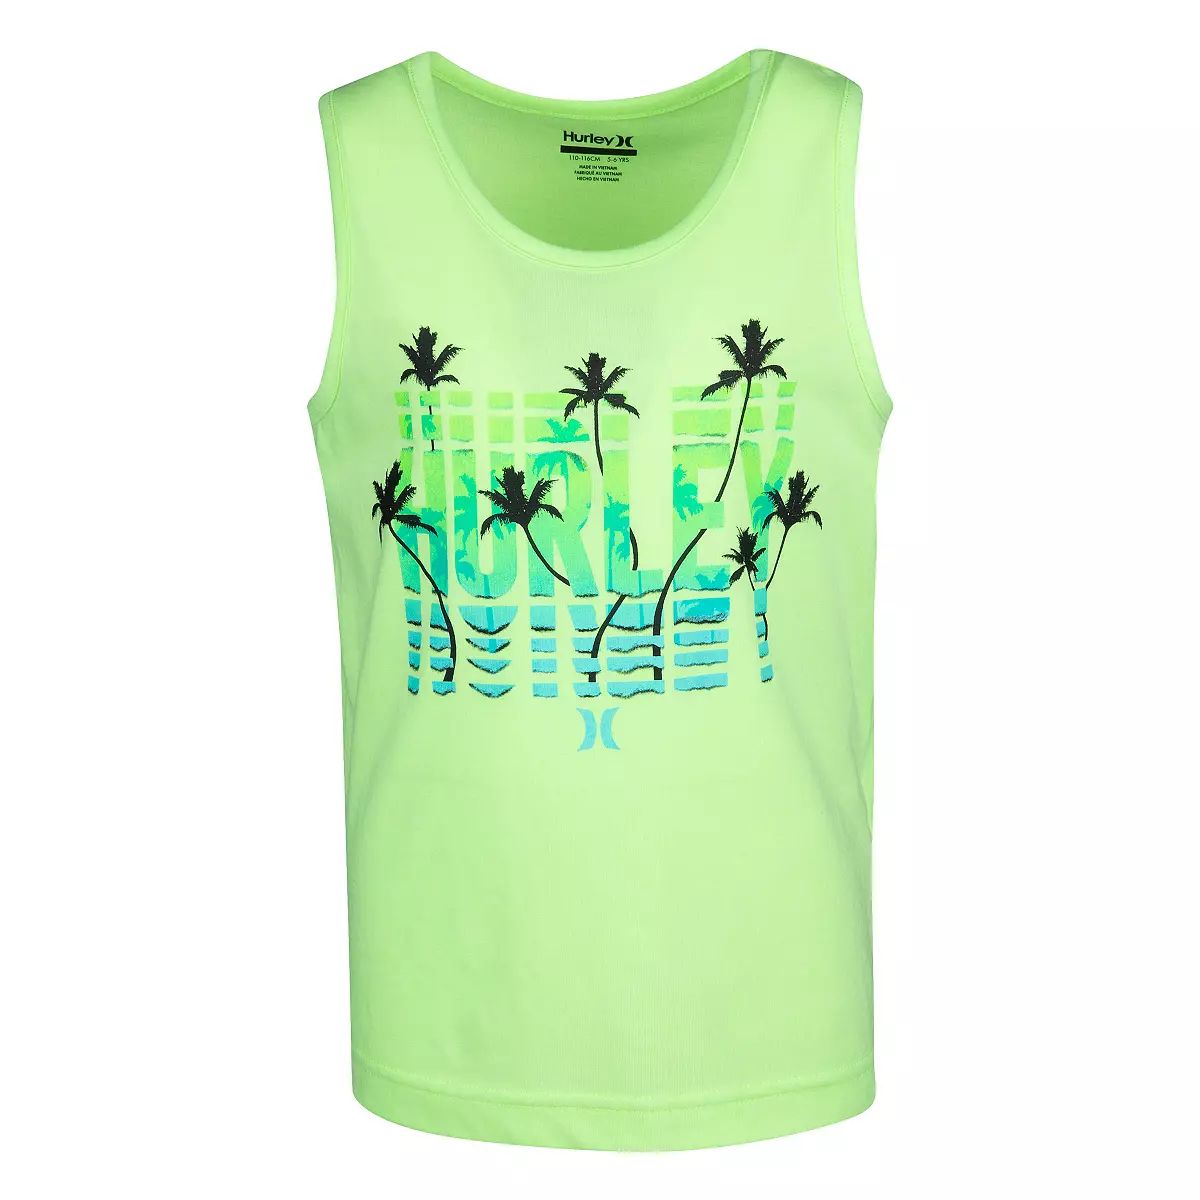 Boys 4-7 Hurley Palm Trees Logo Graphic Muscle Tank Top | Kohl's